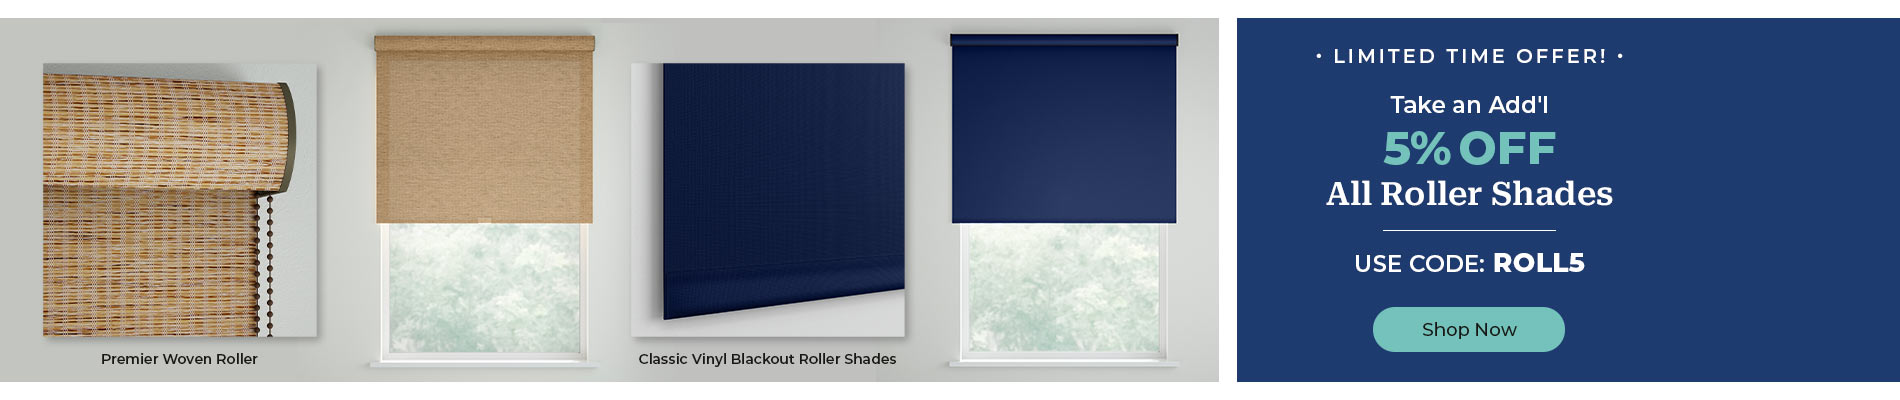 Take an Add'l 5% Off All Roller Shades Use Code ROLL5!